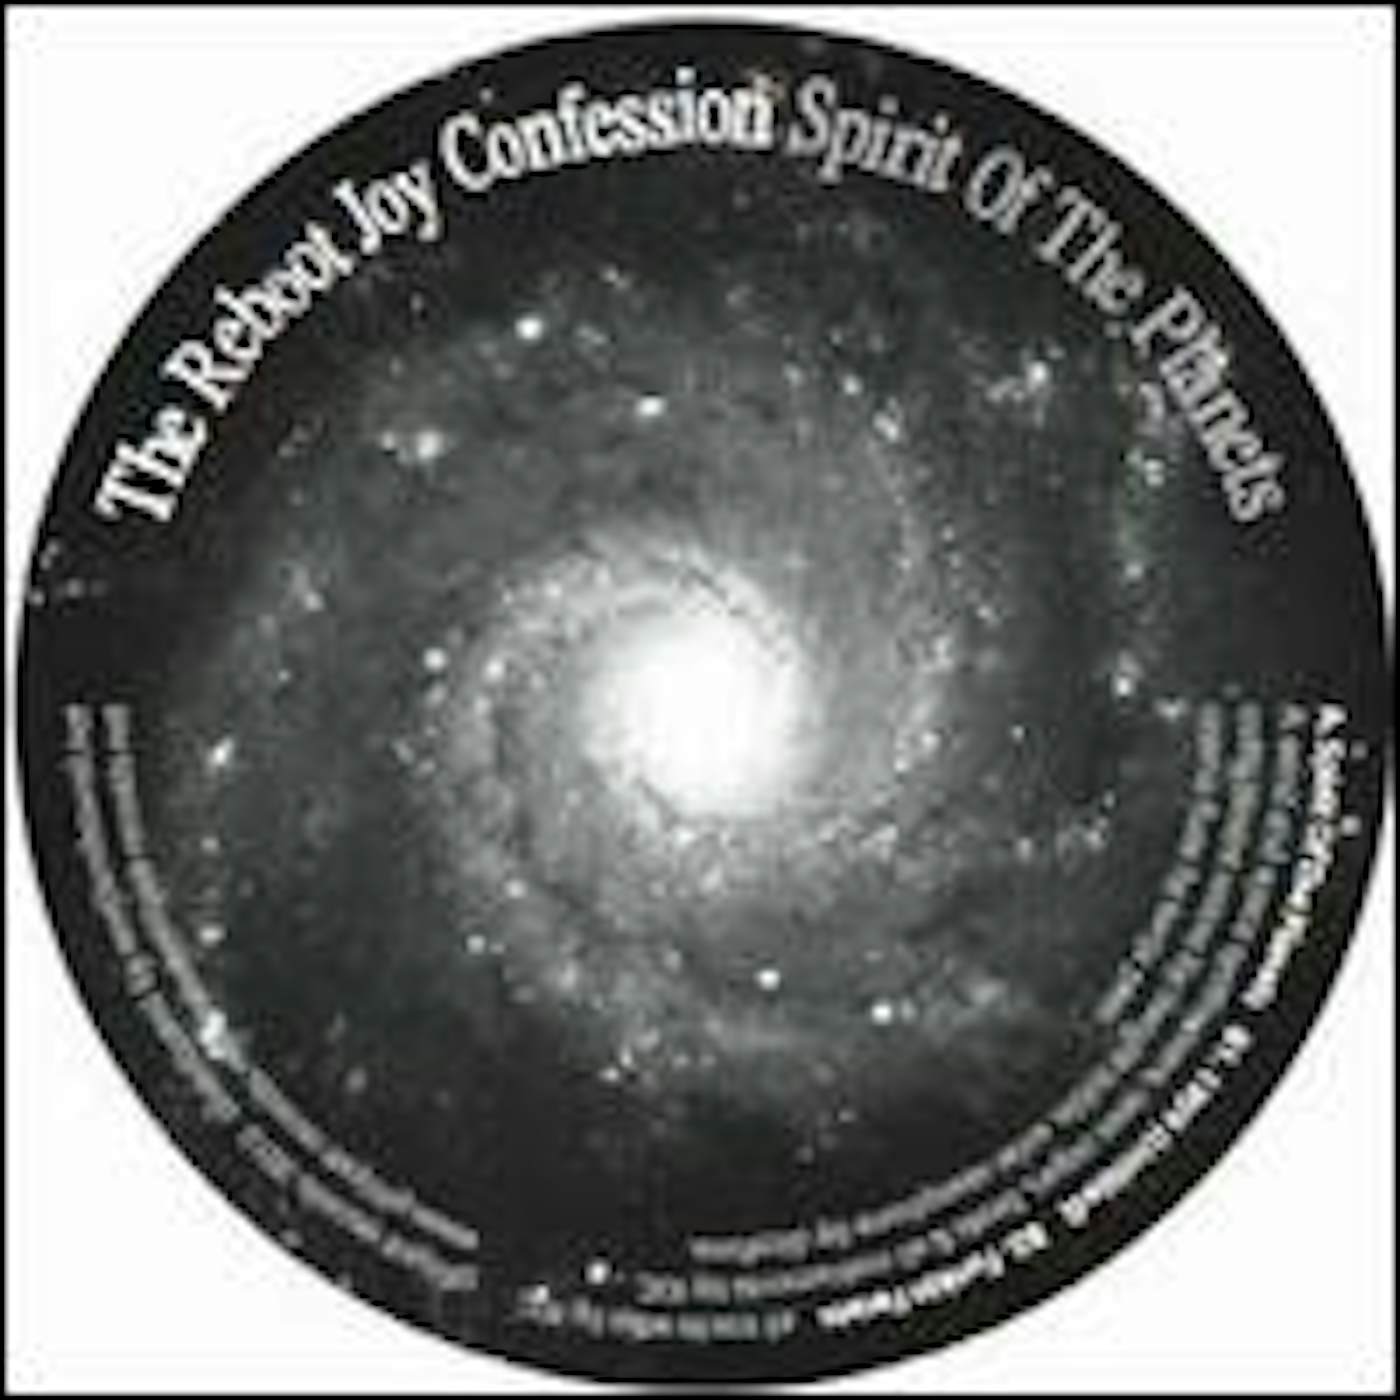 The Reboot Joy Confession SPIRIT OF THE PLANETS Vinyl Record